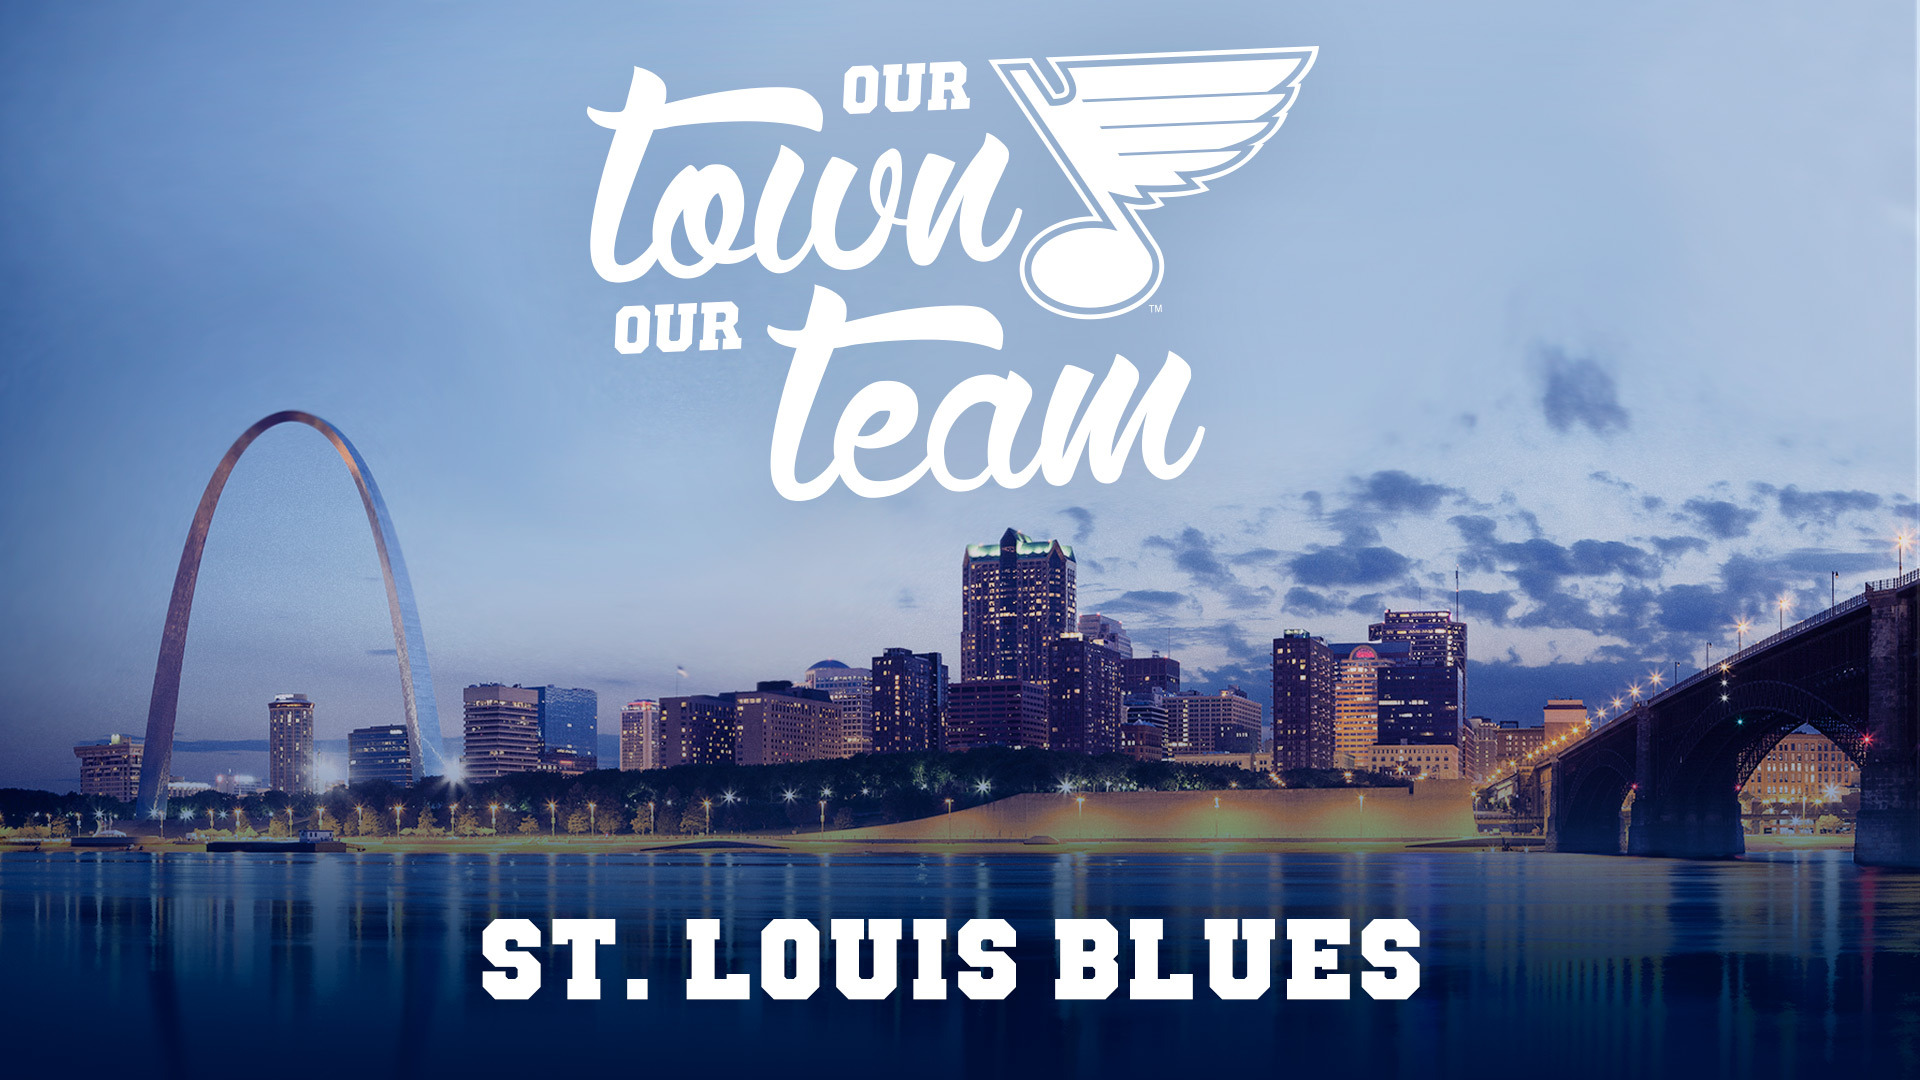 St. Louis Blues Full HD Widescreen wallpapers for